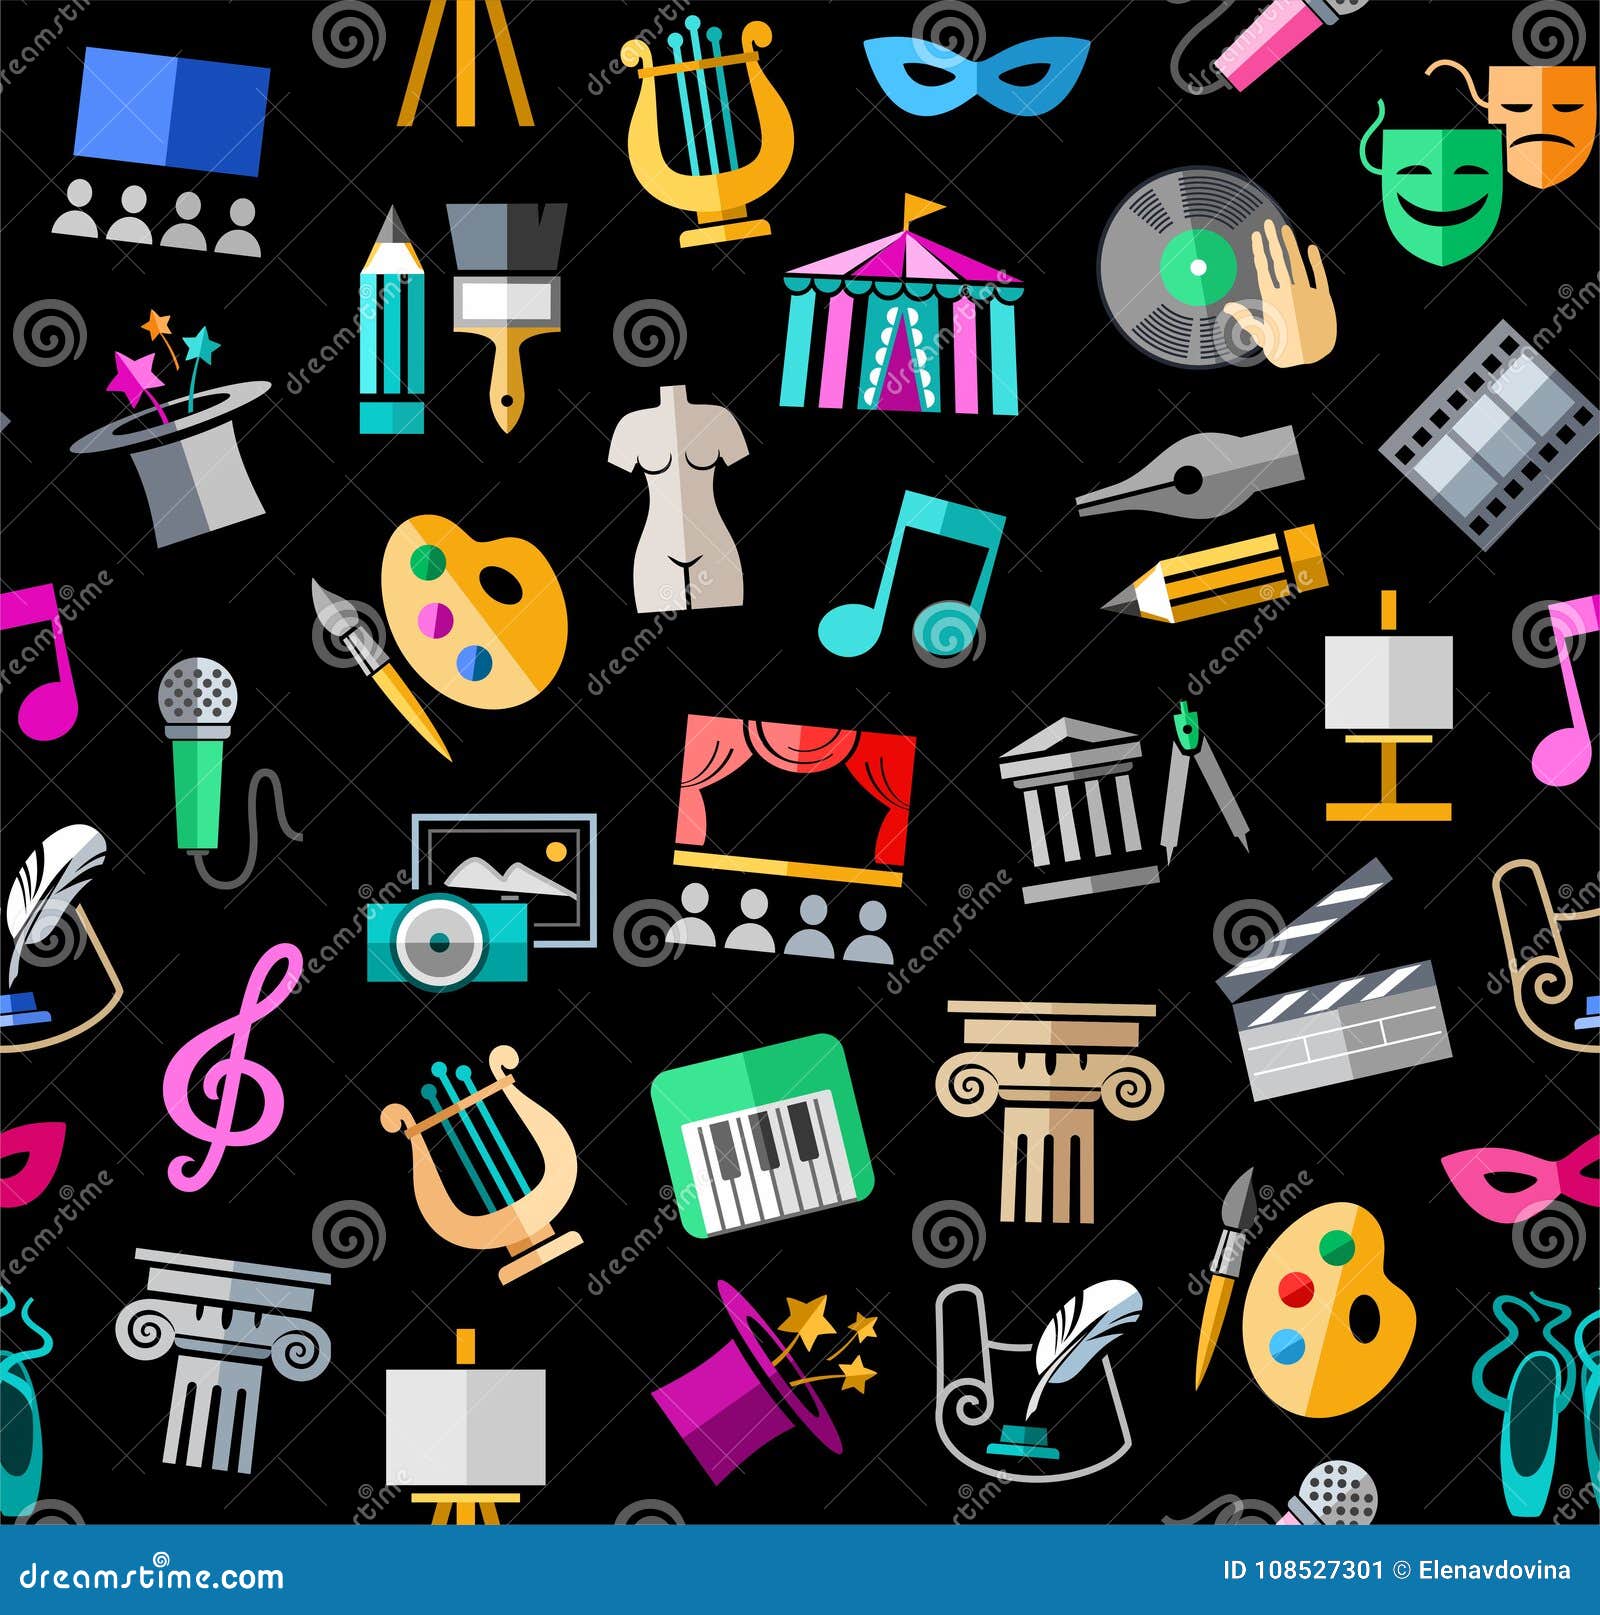 Culture and Art, Seamless Background, Color, Black, Vector. Stock ...